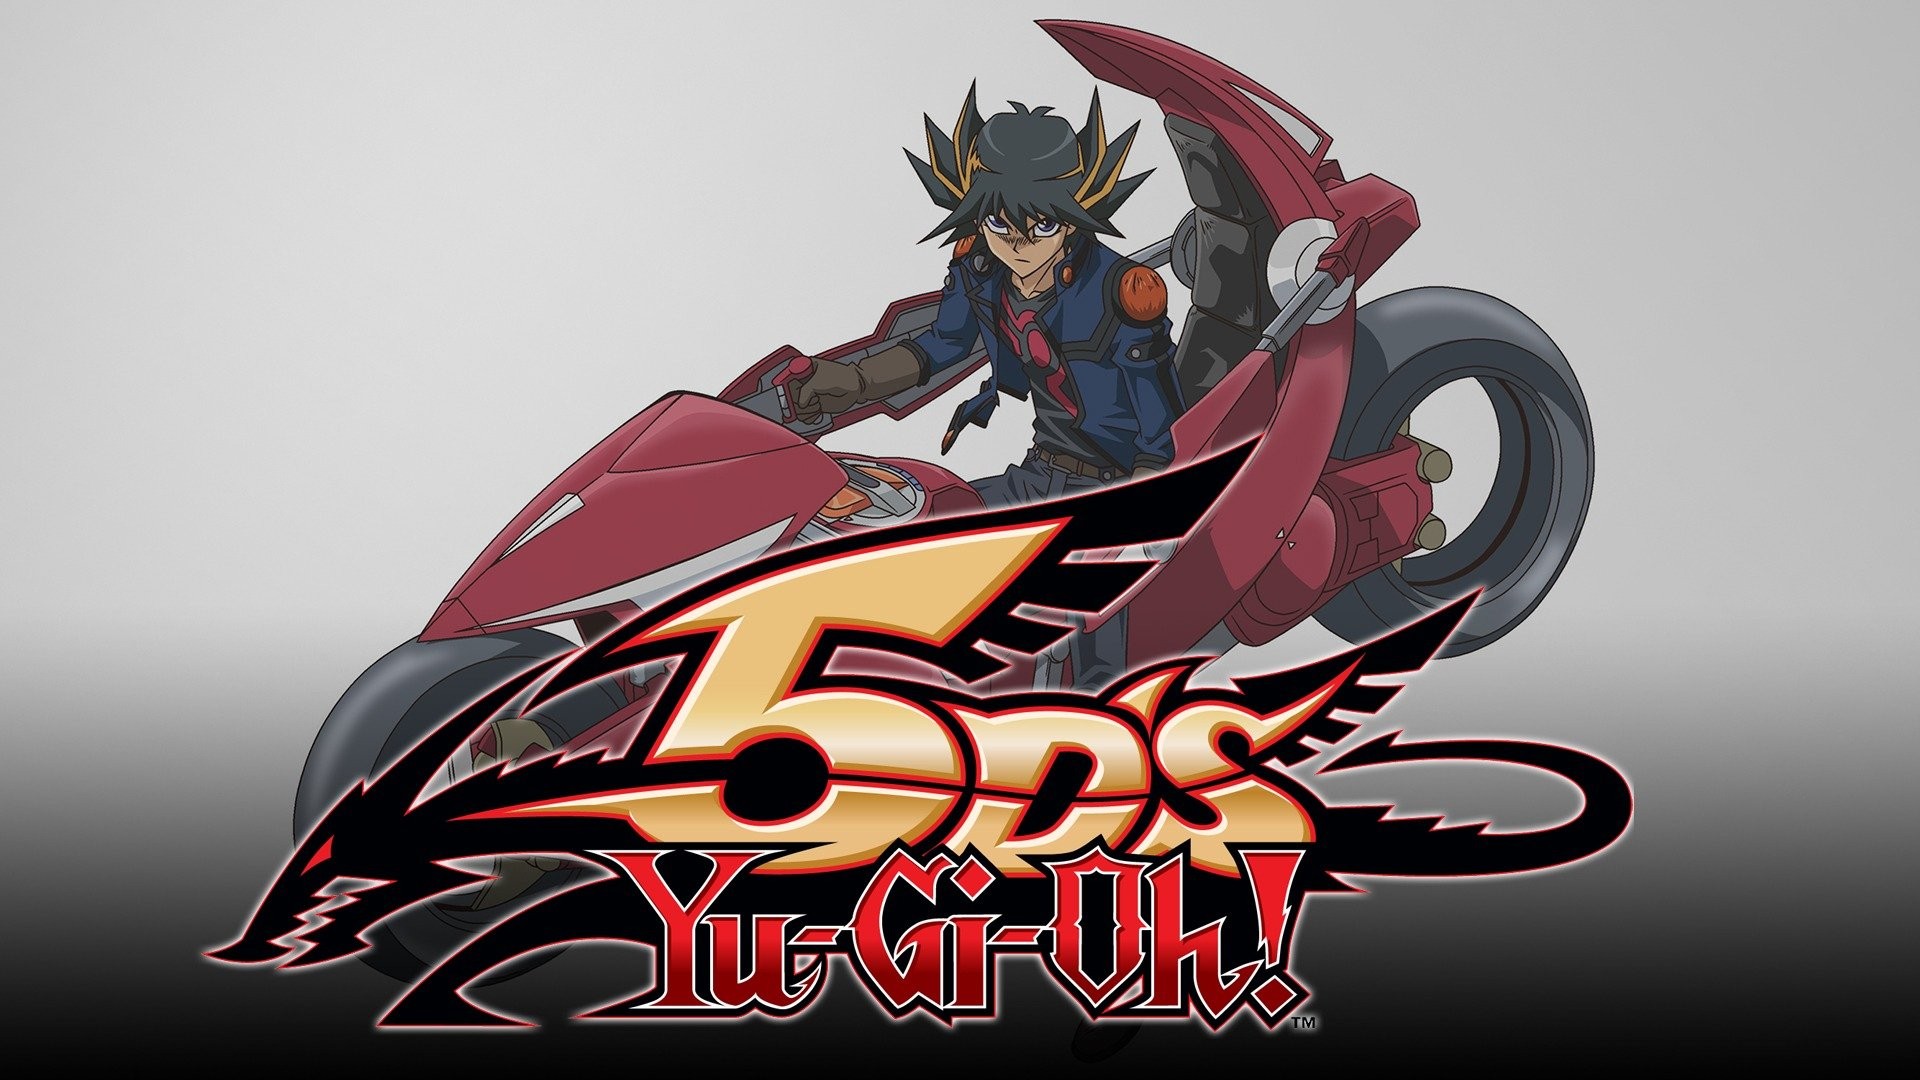 Buy Yu-Gi-Oh! 5Ds For the Future from the Humble Store